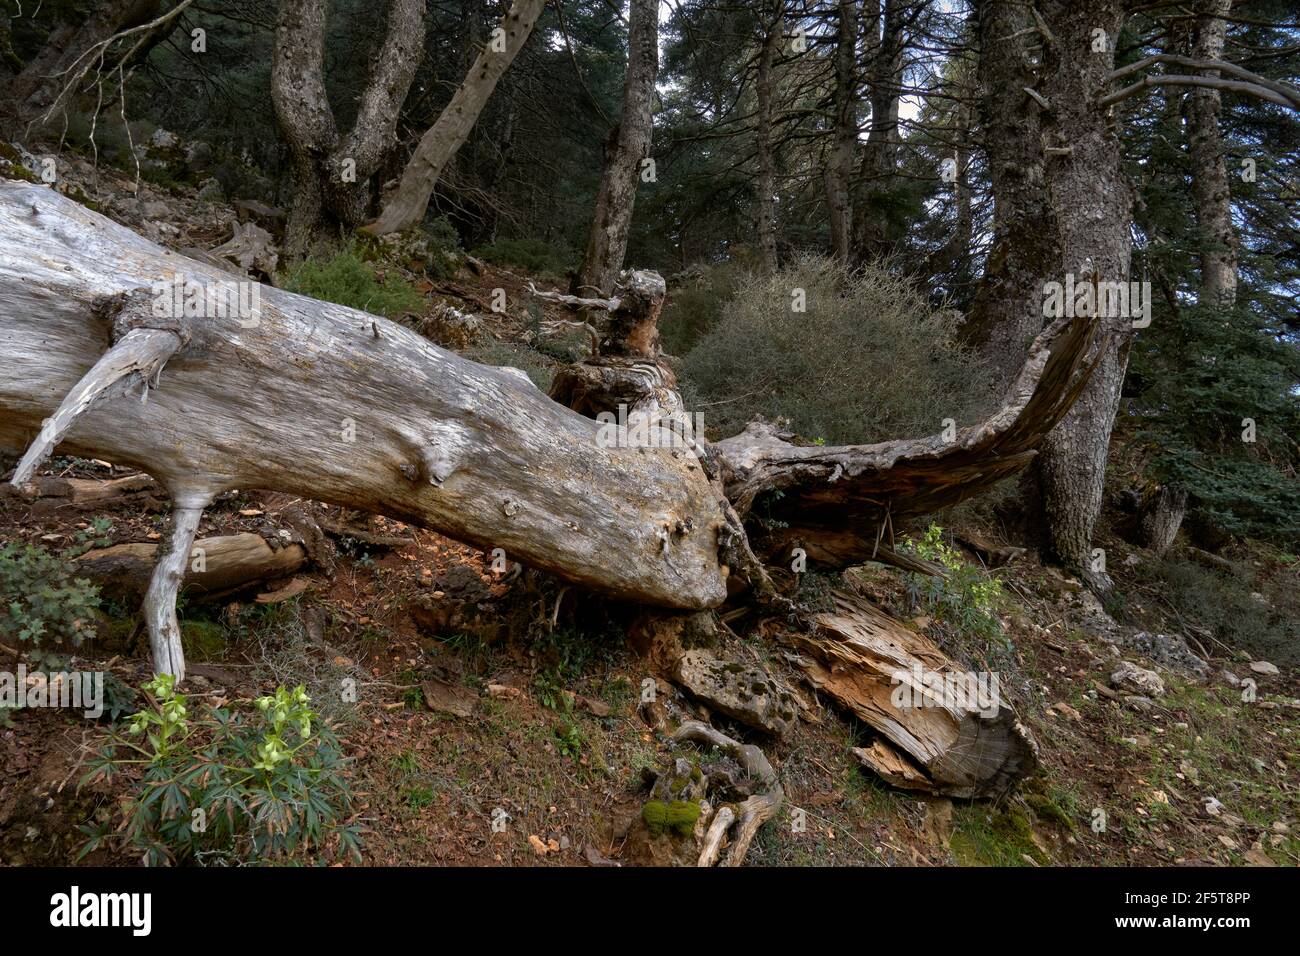 detail of Spanish fir (abies pinsapo) trunk in the Yunquera fir tree, in the Sierra de las Nieves national park in Malaga. Andalusia, Spain Stock Photo